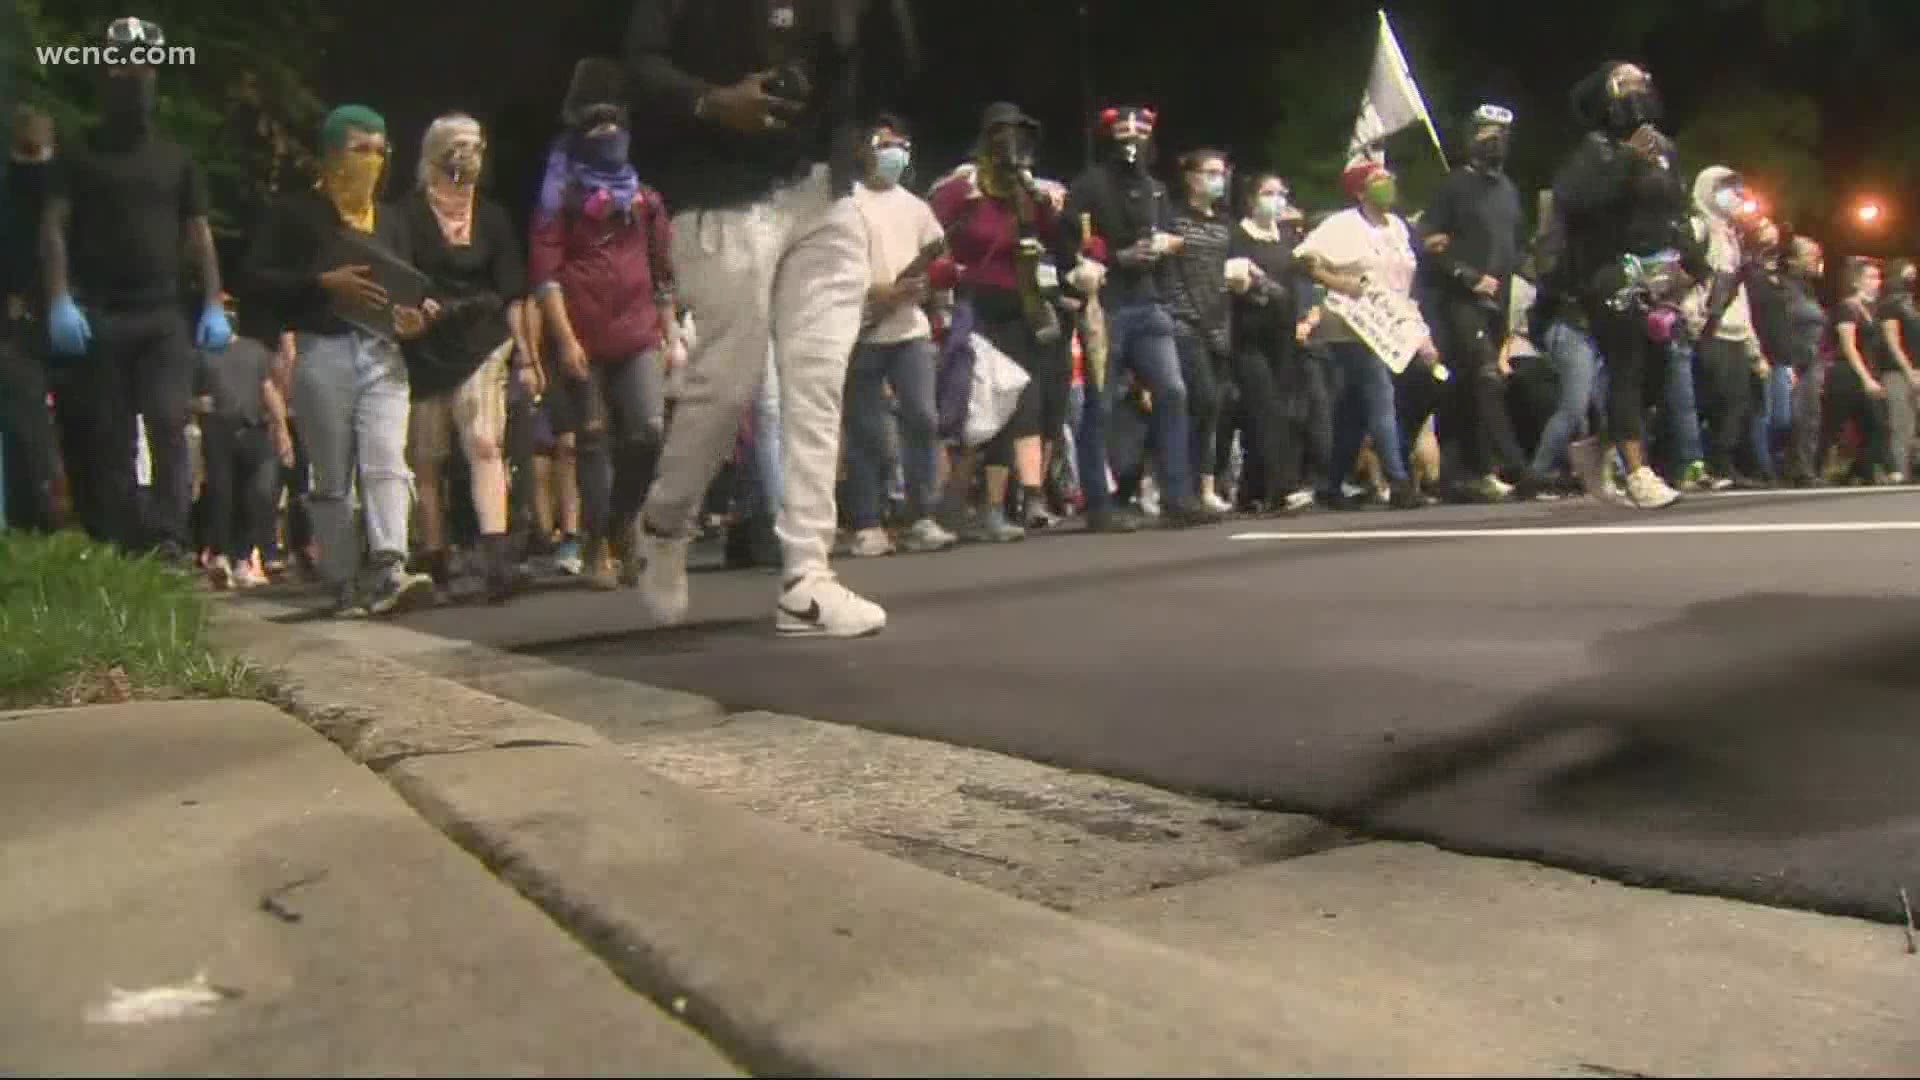 Charlotte-Mecklenburg Police said two protesters were hurt when officers deployed tear gas to disperse crowds Monday night.